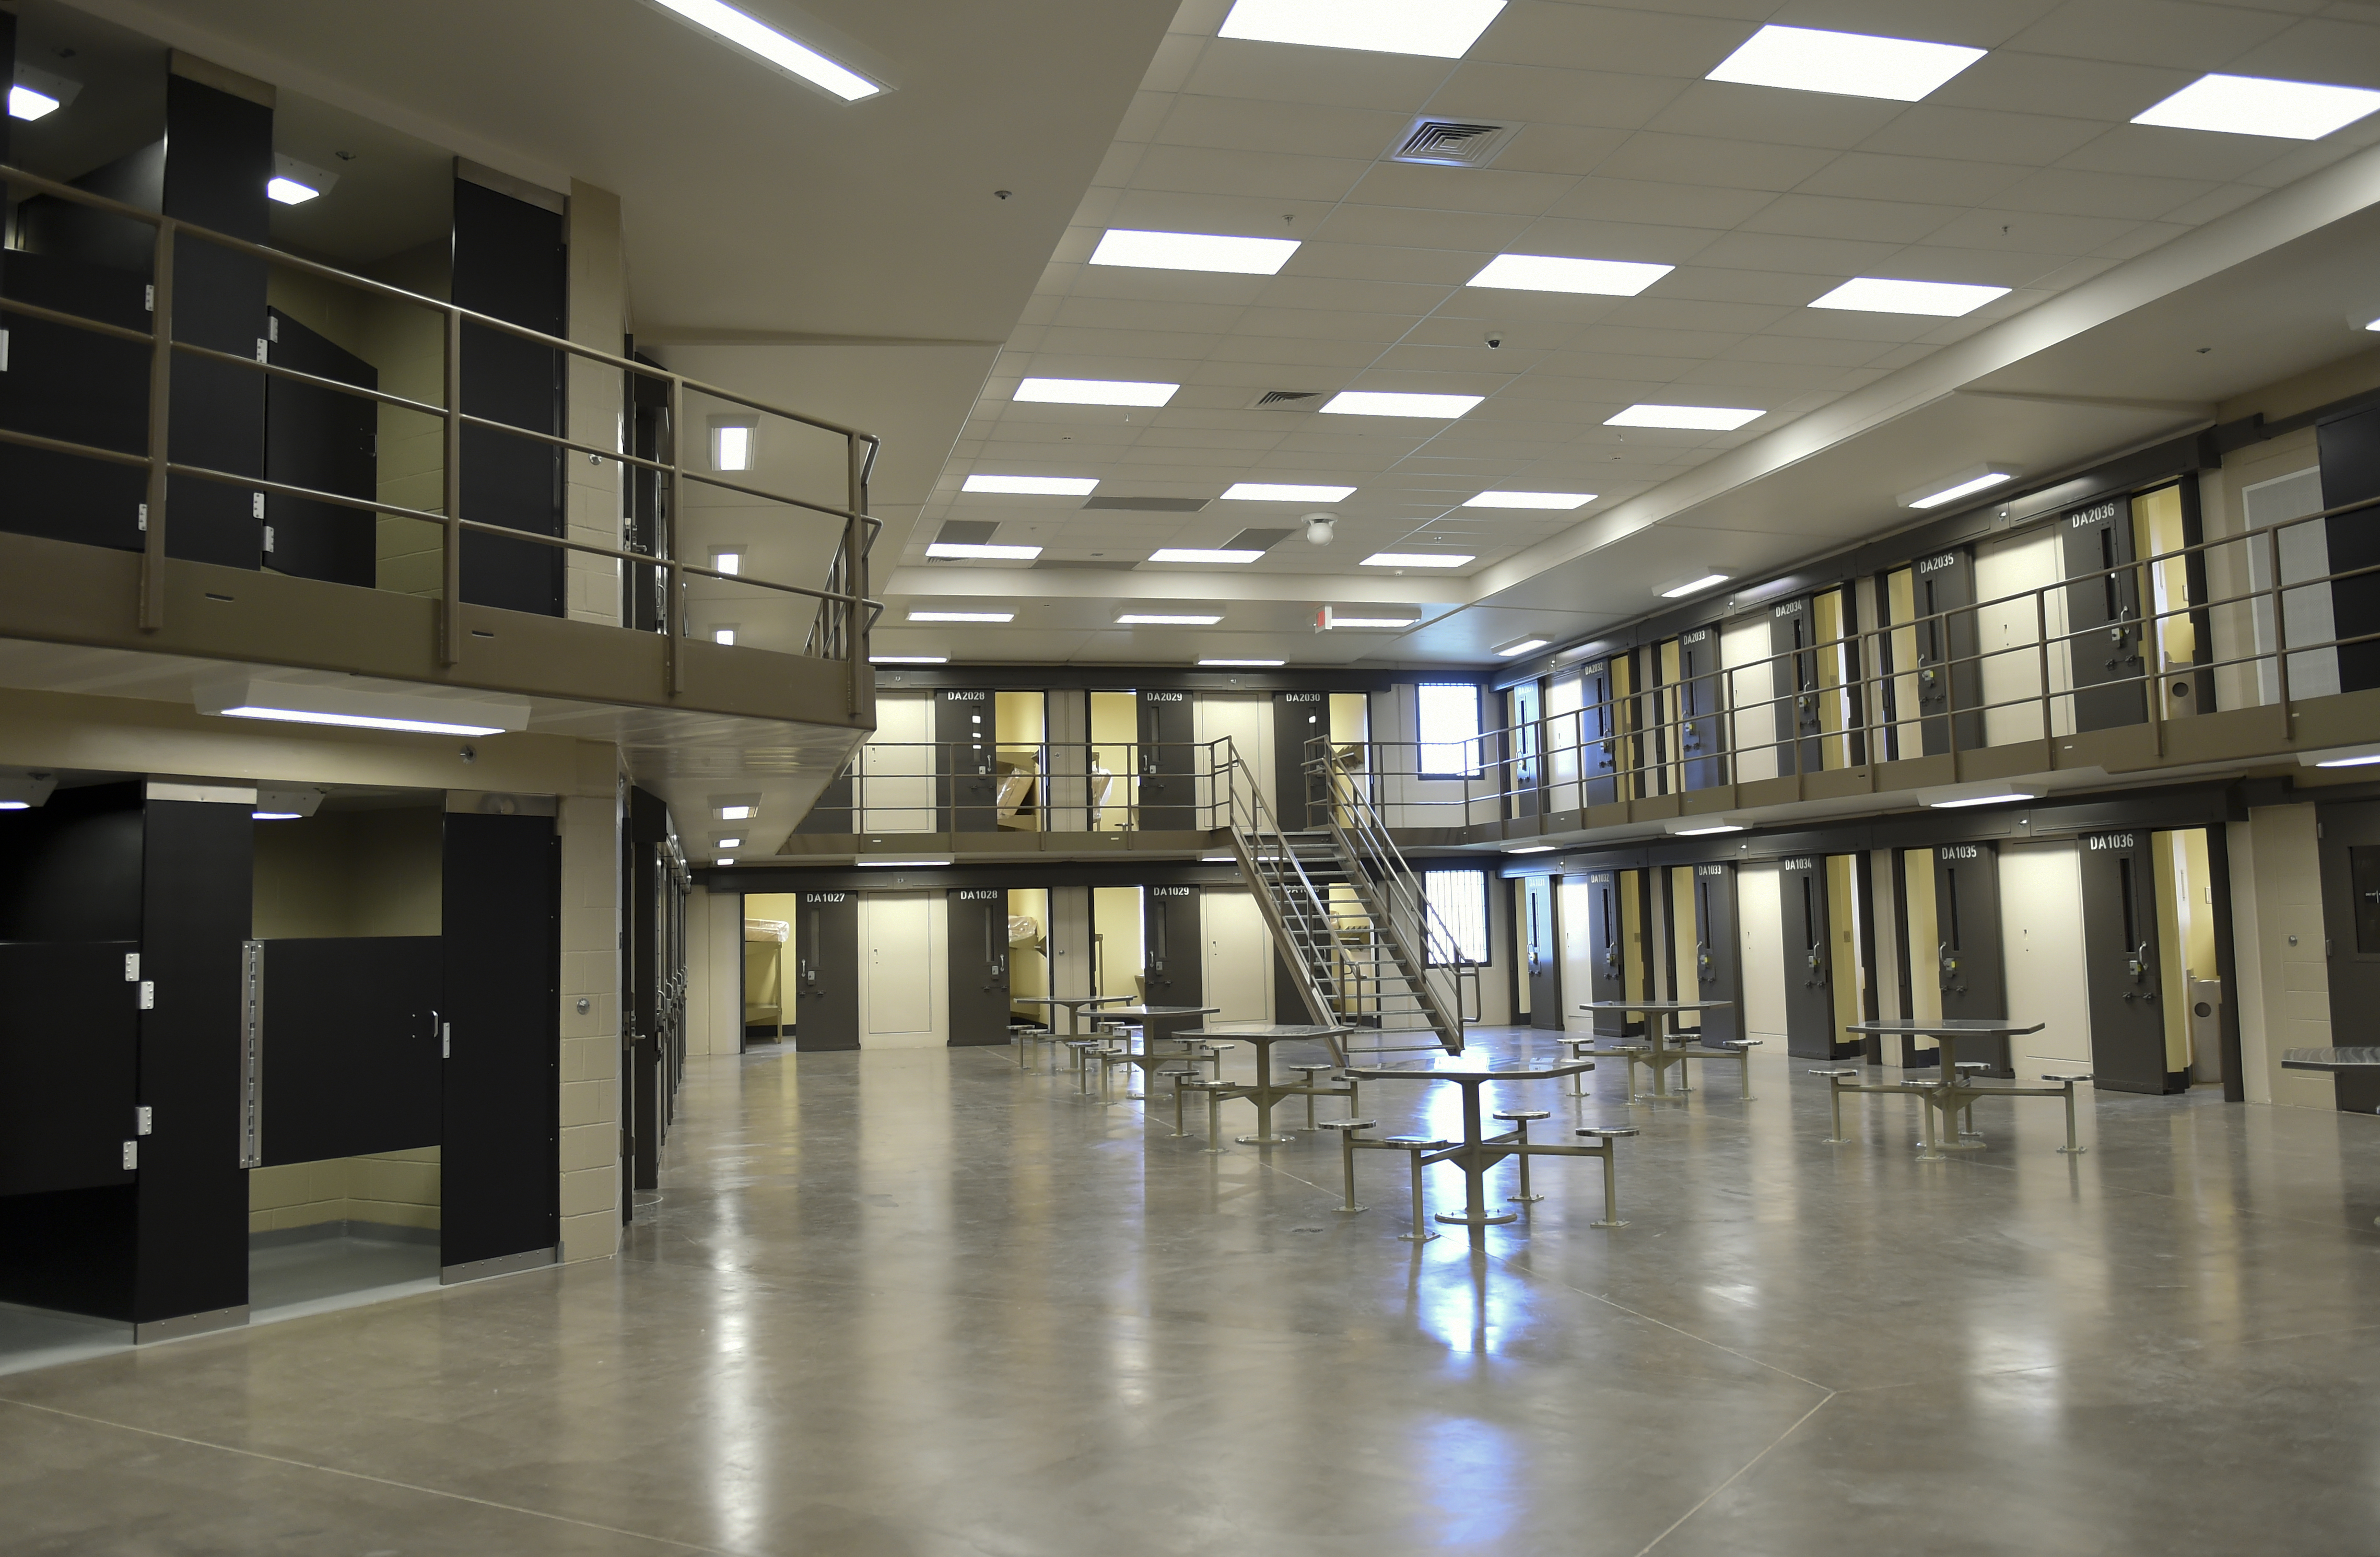 Inside block D at the State Correctional Institution in Phoenixville, Pennsylvania on June 1, 2018. (Lauren A. Little—Reading Eagle/Getty Images)